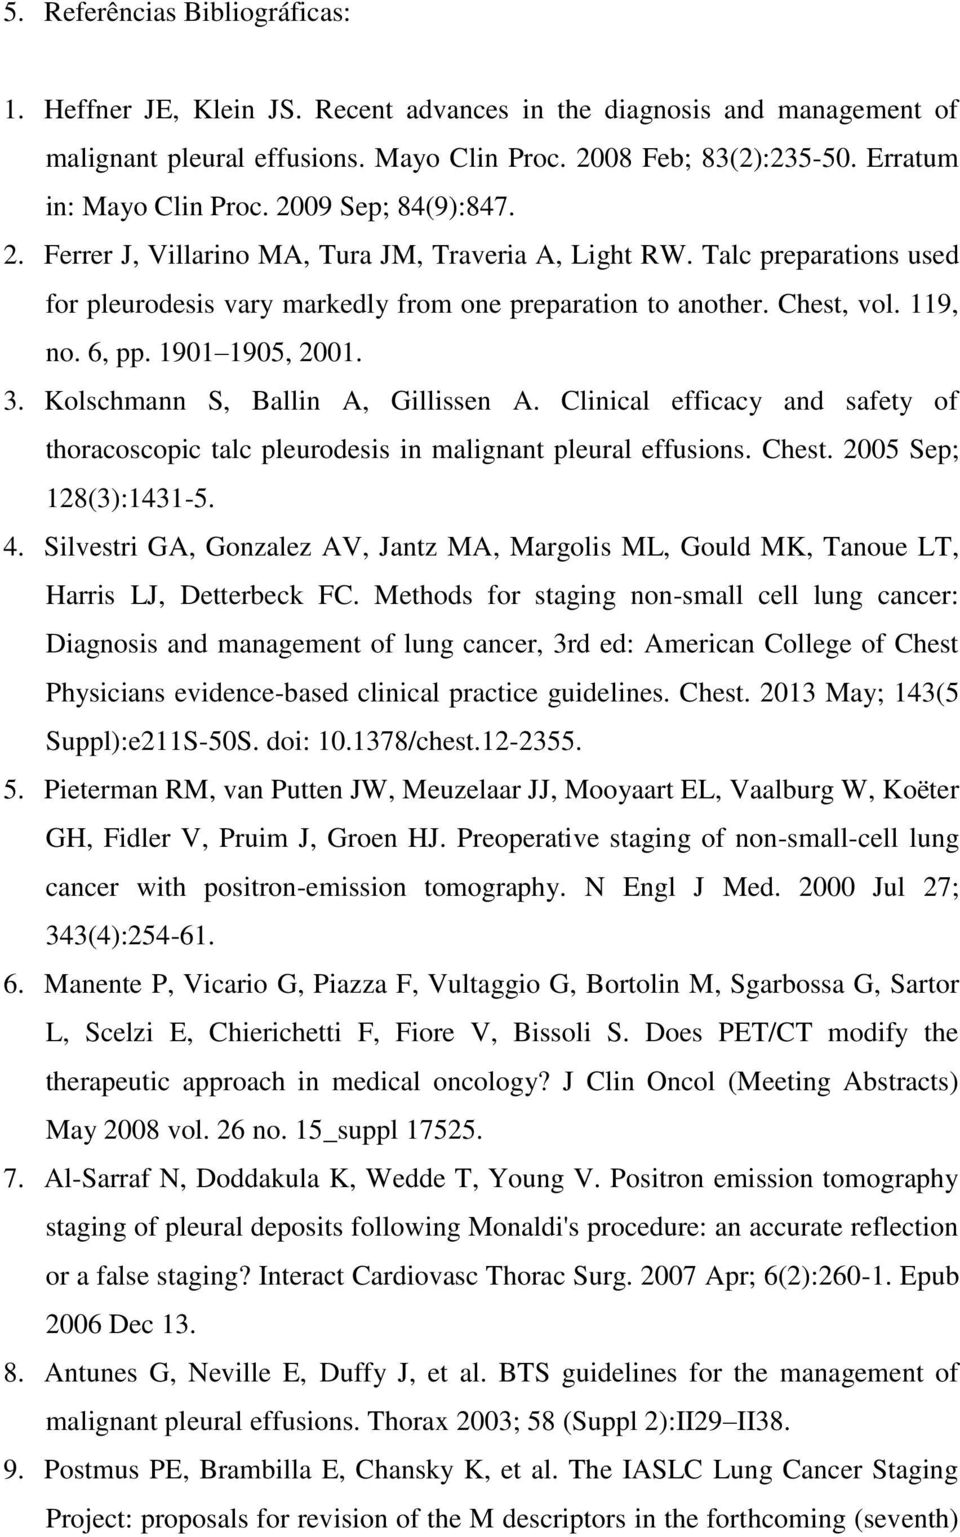 Chest, vol. 119, no. 6, pp. 1901 1905, 2001. 3. Kolschmann S, Ballin A, Gillissen A. Clinical efficacy and safety of thoracoscopic talc pleurodesis in malignant pleural effusions. Chest.